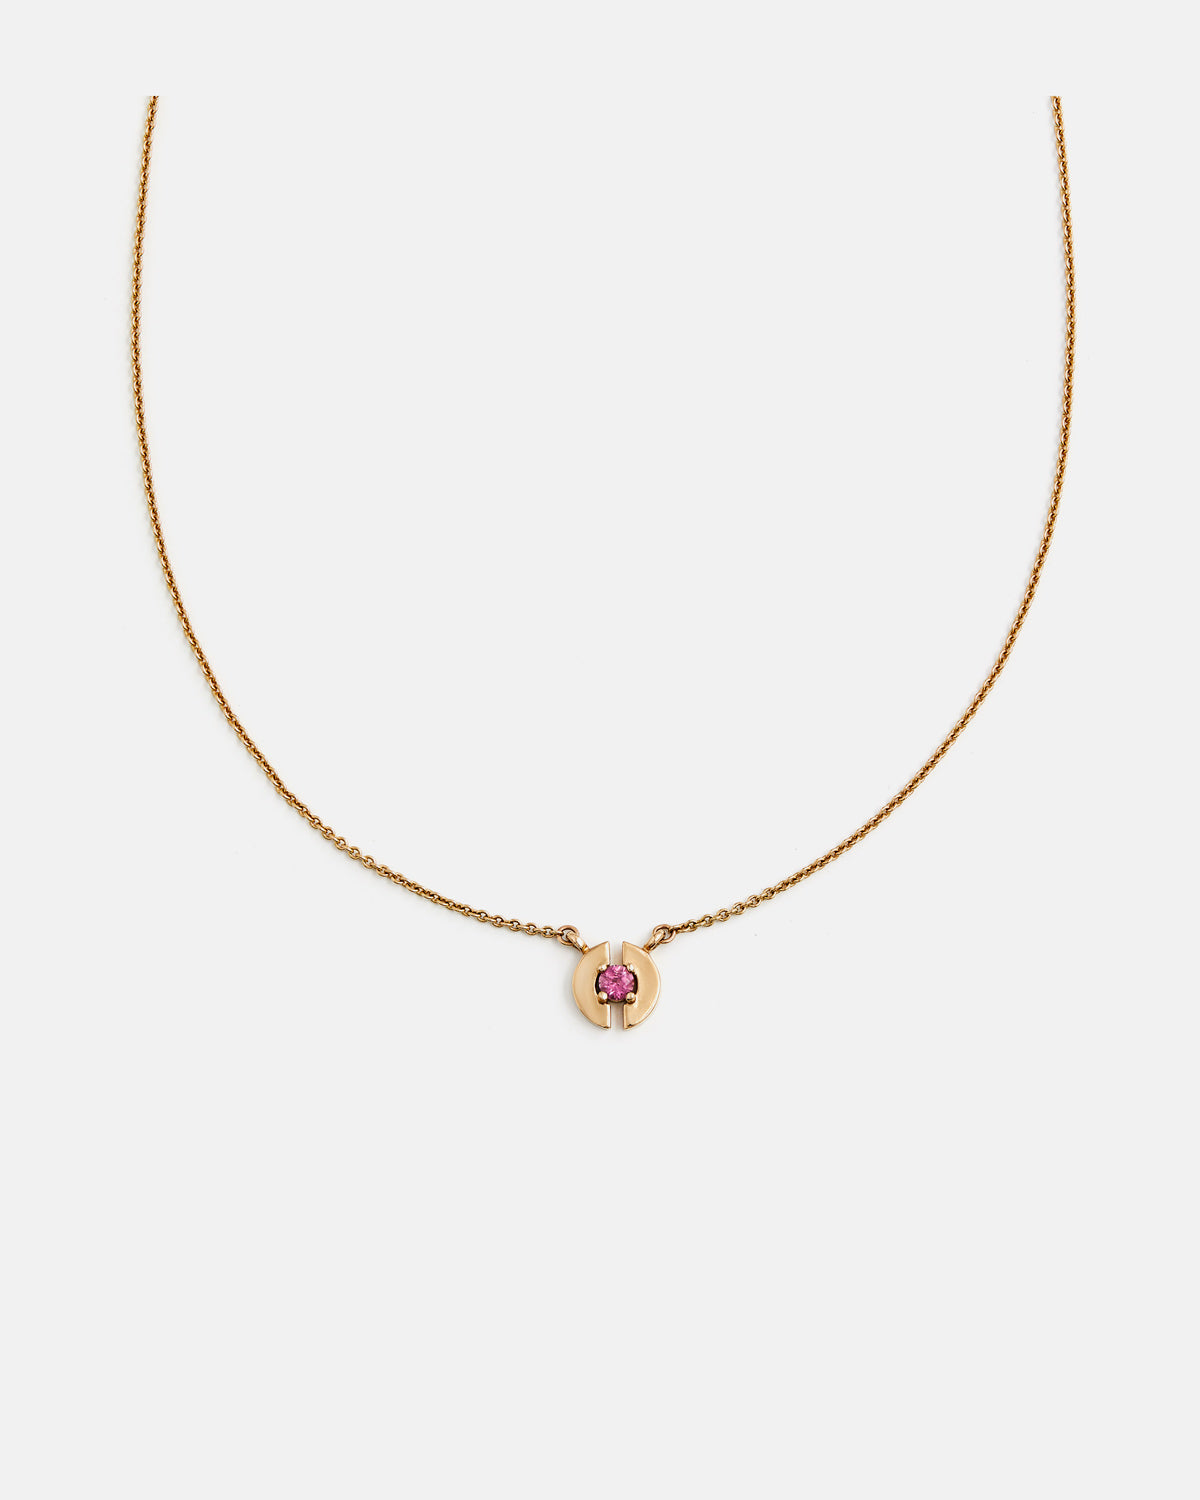 Stein Necklace in Yellow Gold with Pink Tourmaline